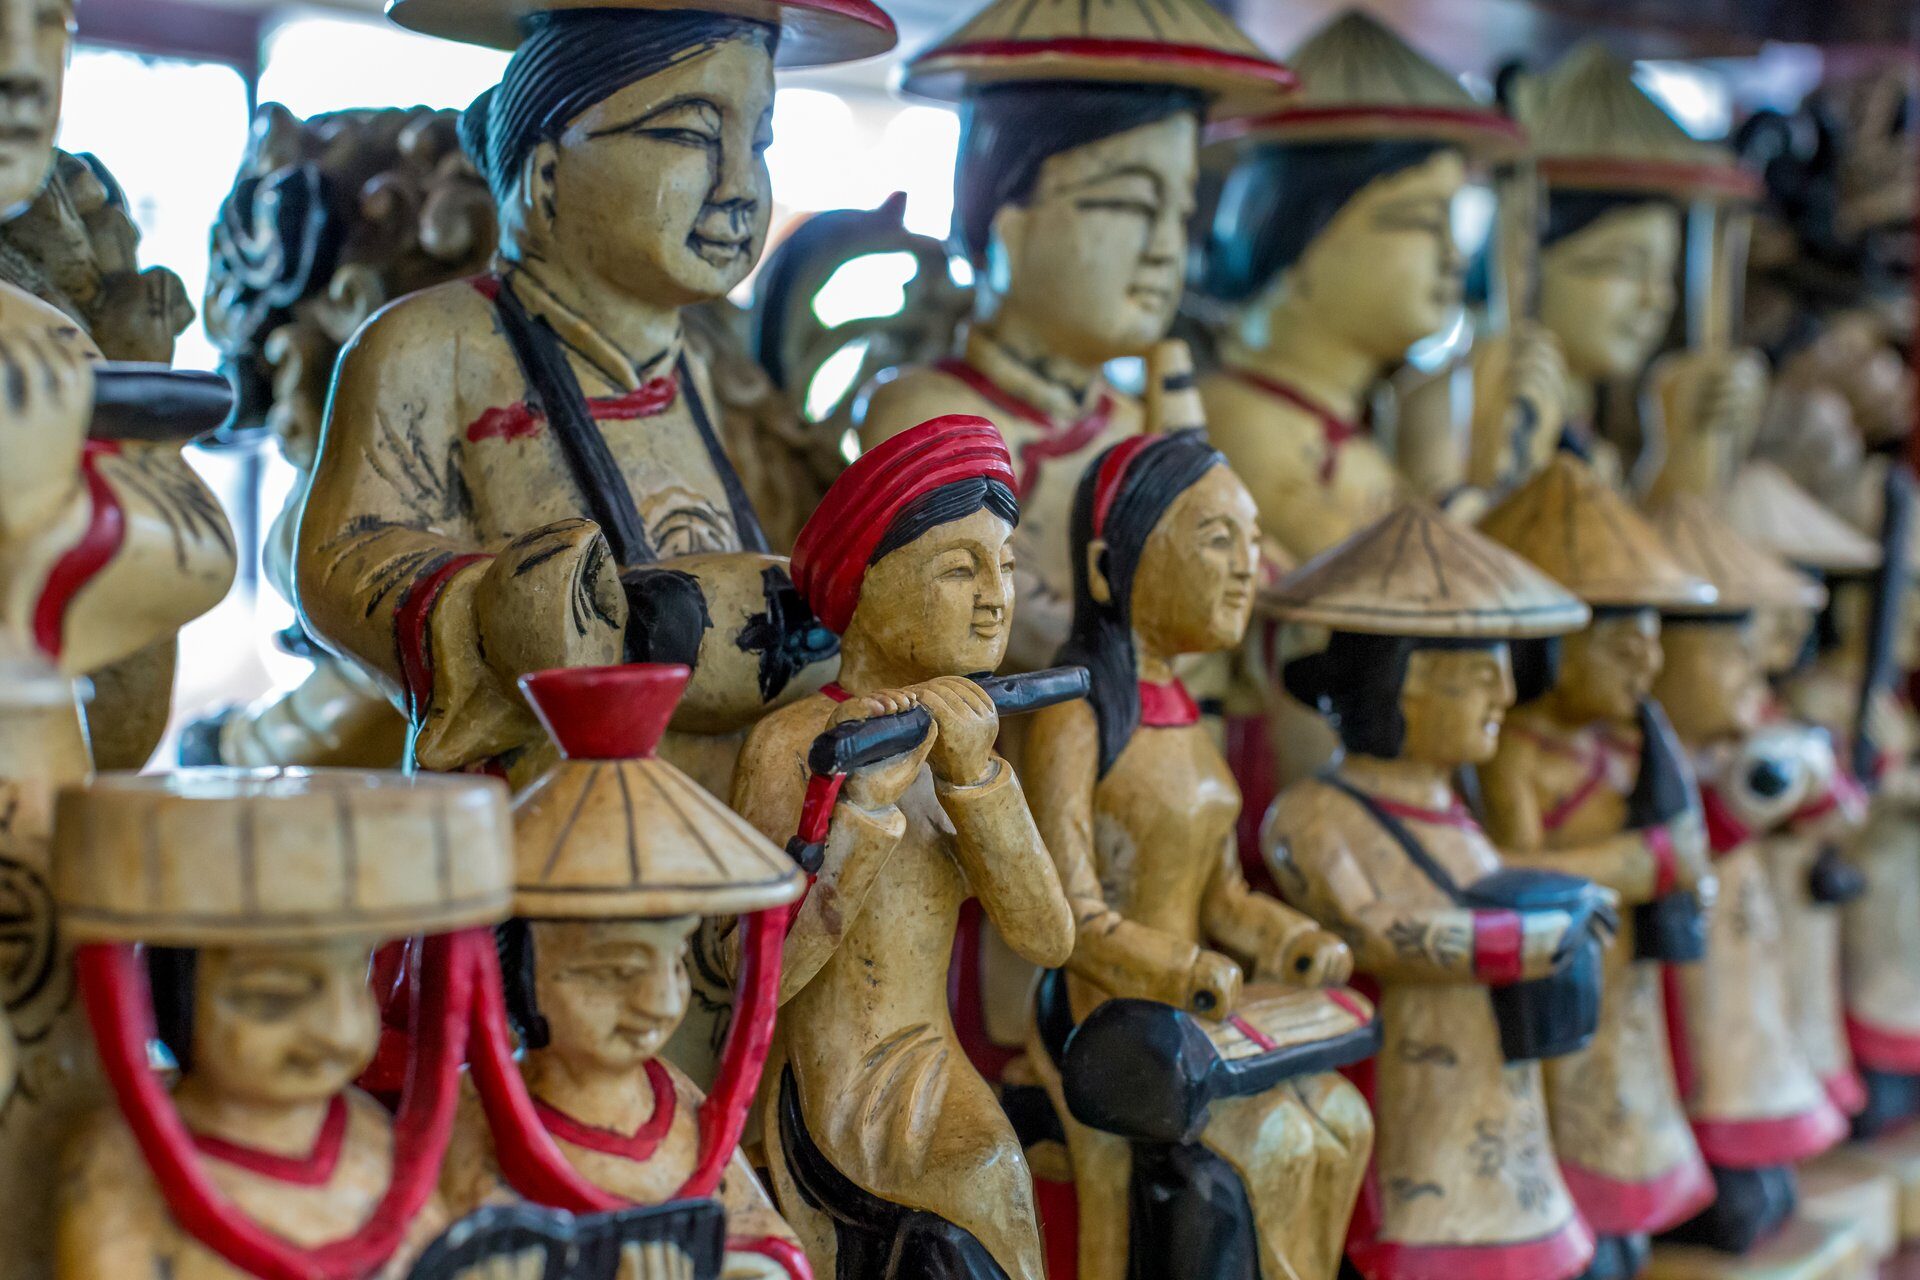 Souvenirs] Popular souvenirs of Vietnam that you can buy in Phu Quoc -  phuquocjapan